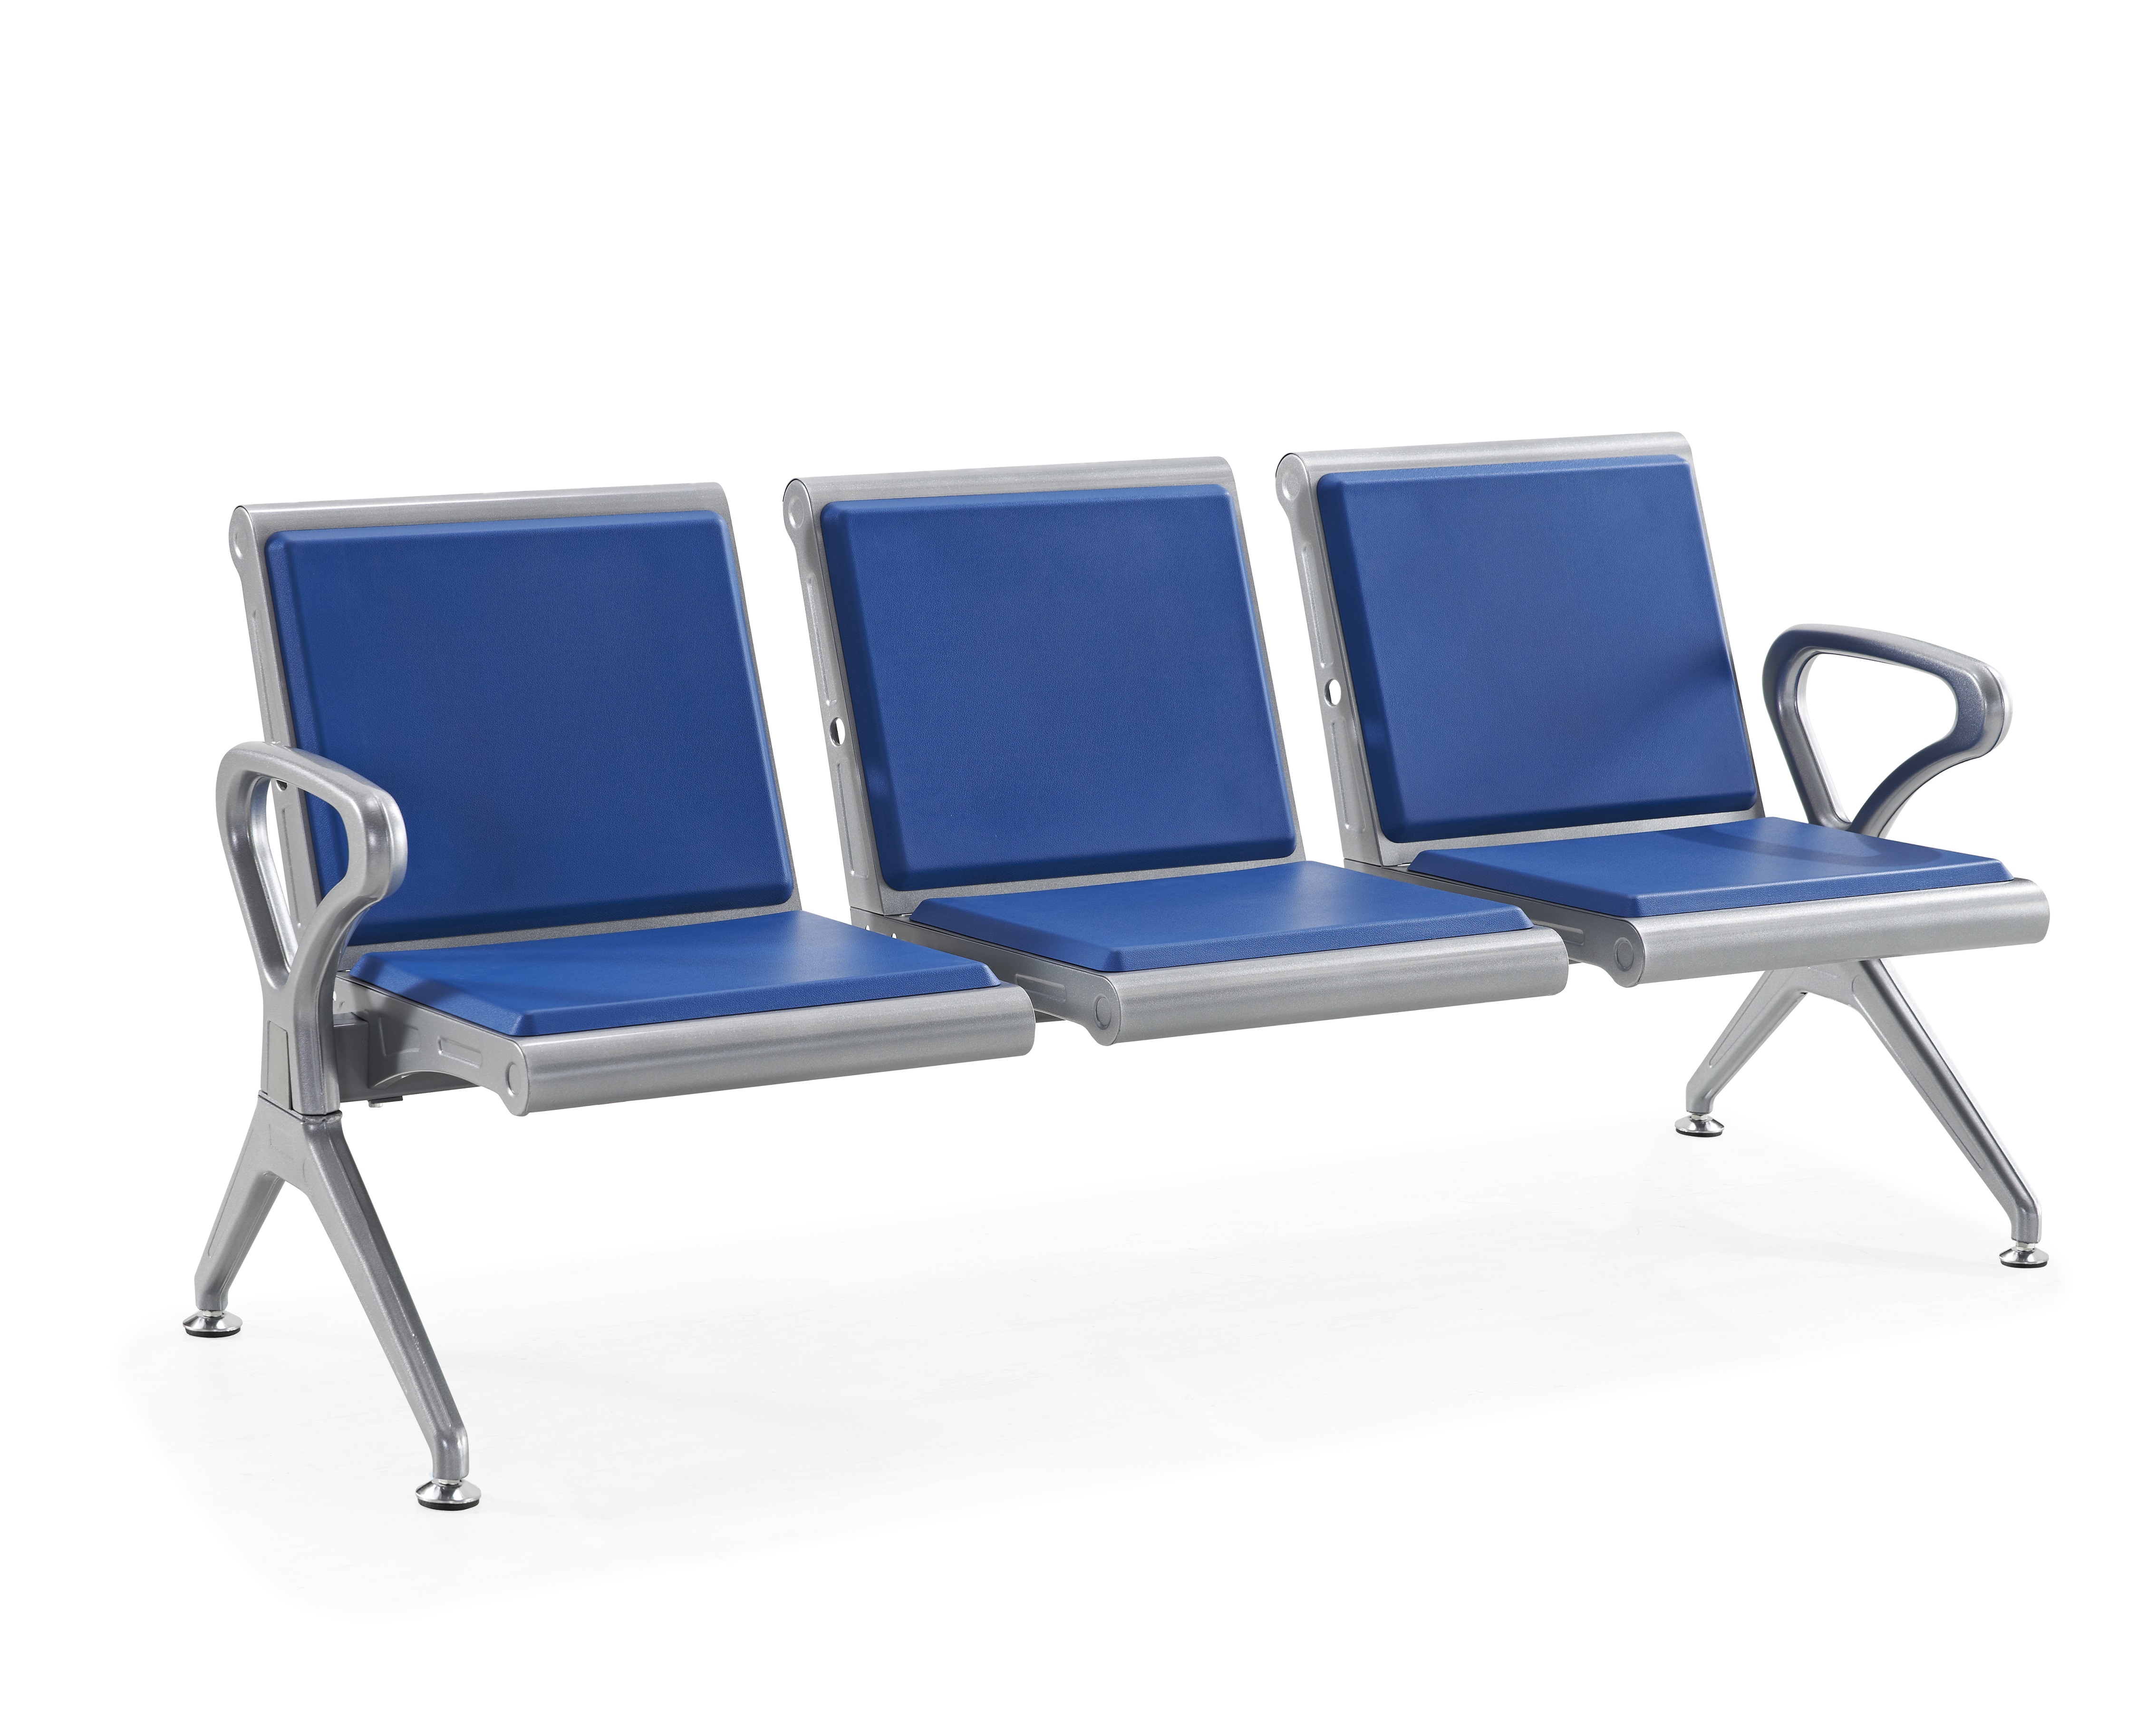 Hospital Bank Airport Bench Seats 3 Seats Waiting Room Beam Chair Waiting Room Chair